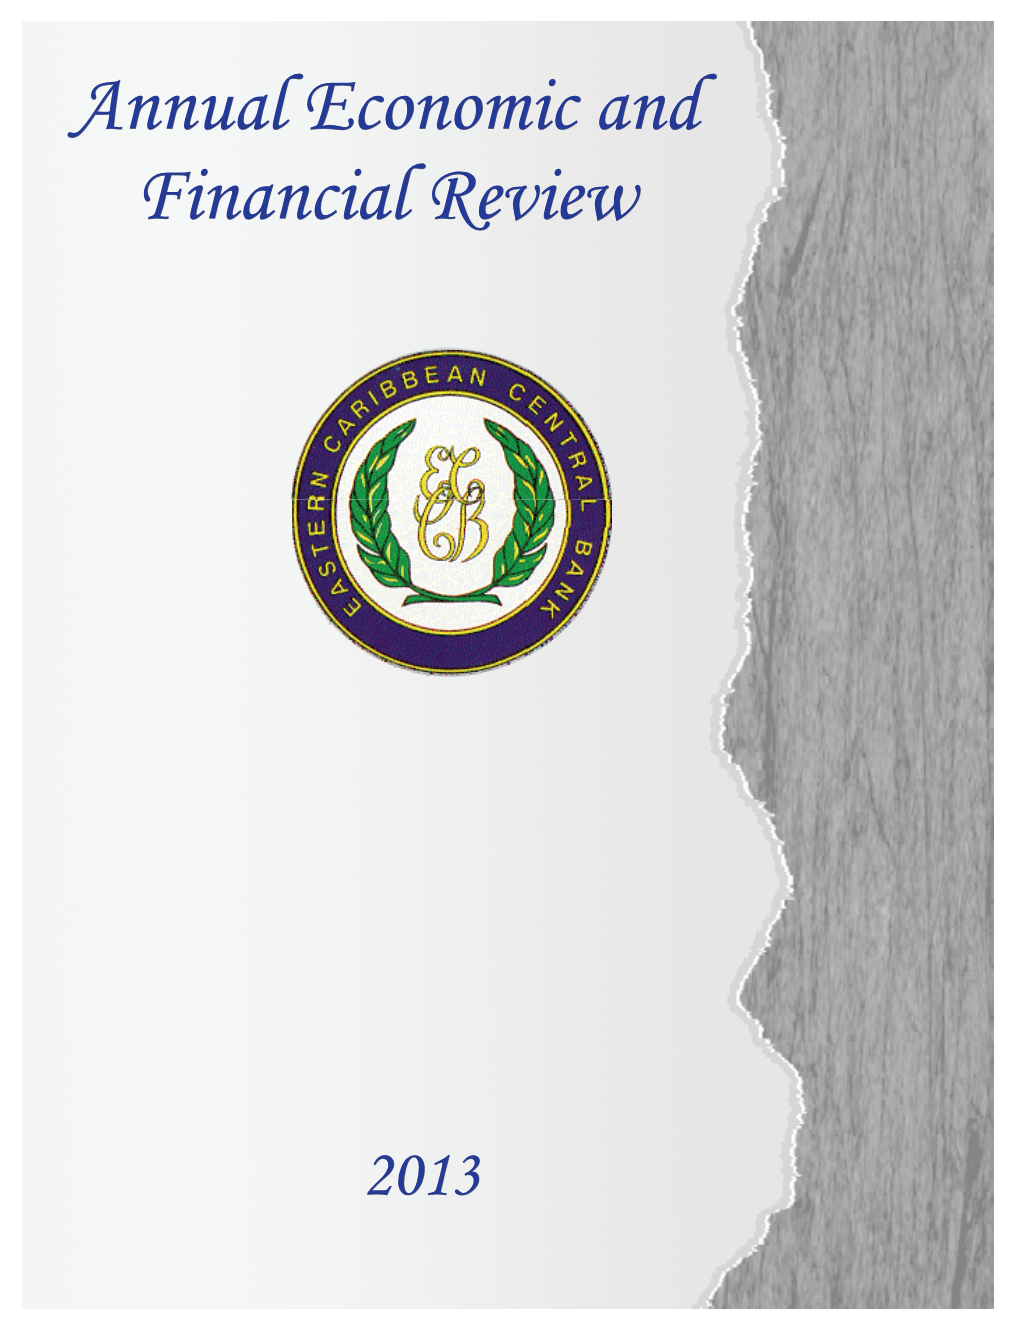 Annual Economic and Financial Review